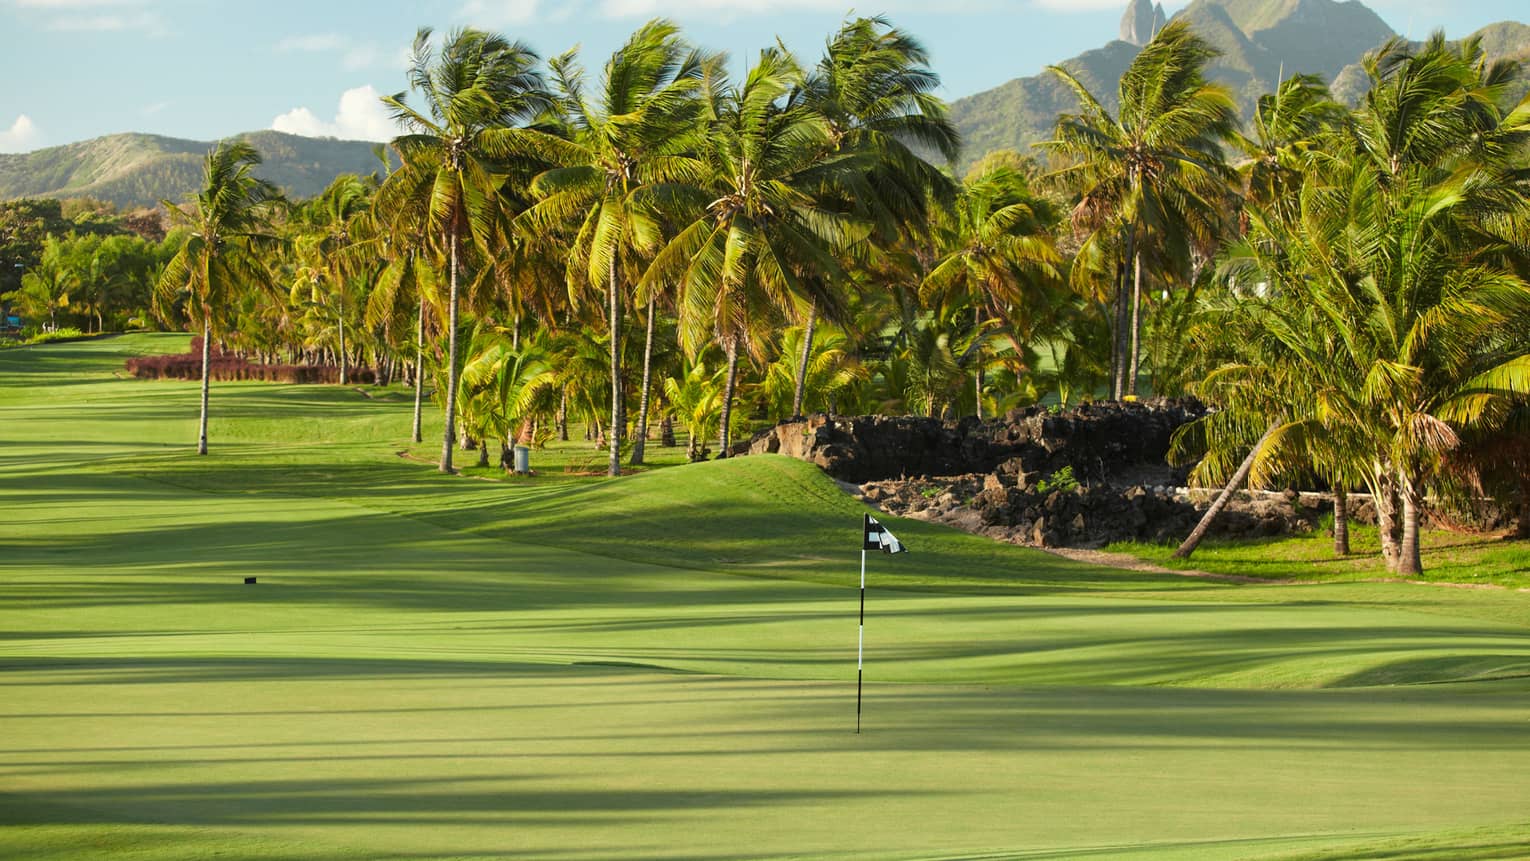 Flags on 10th hole of golf course with tropical palm trees lining green